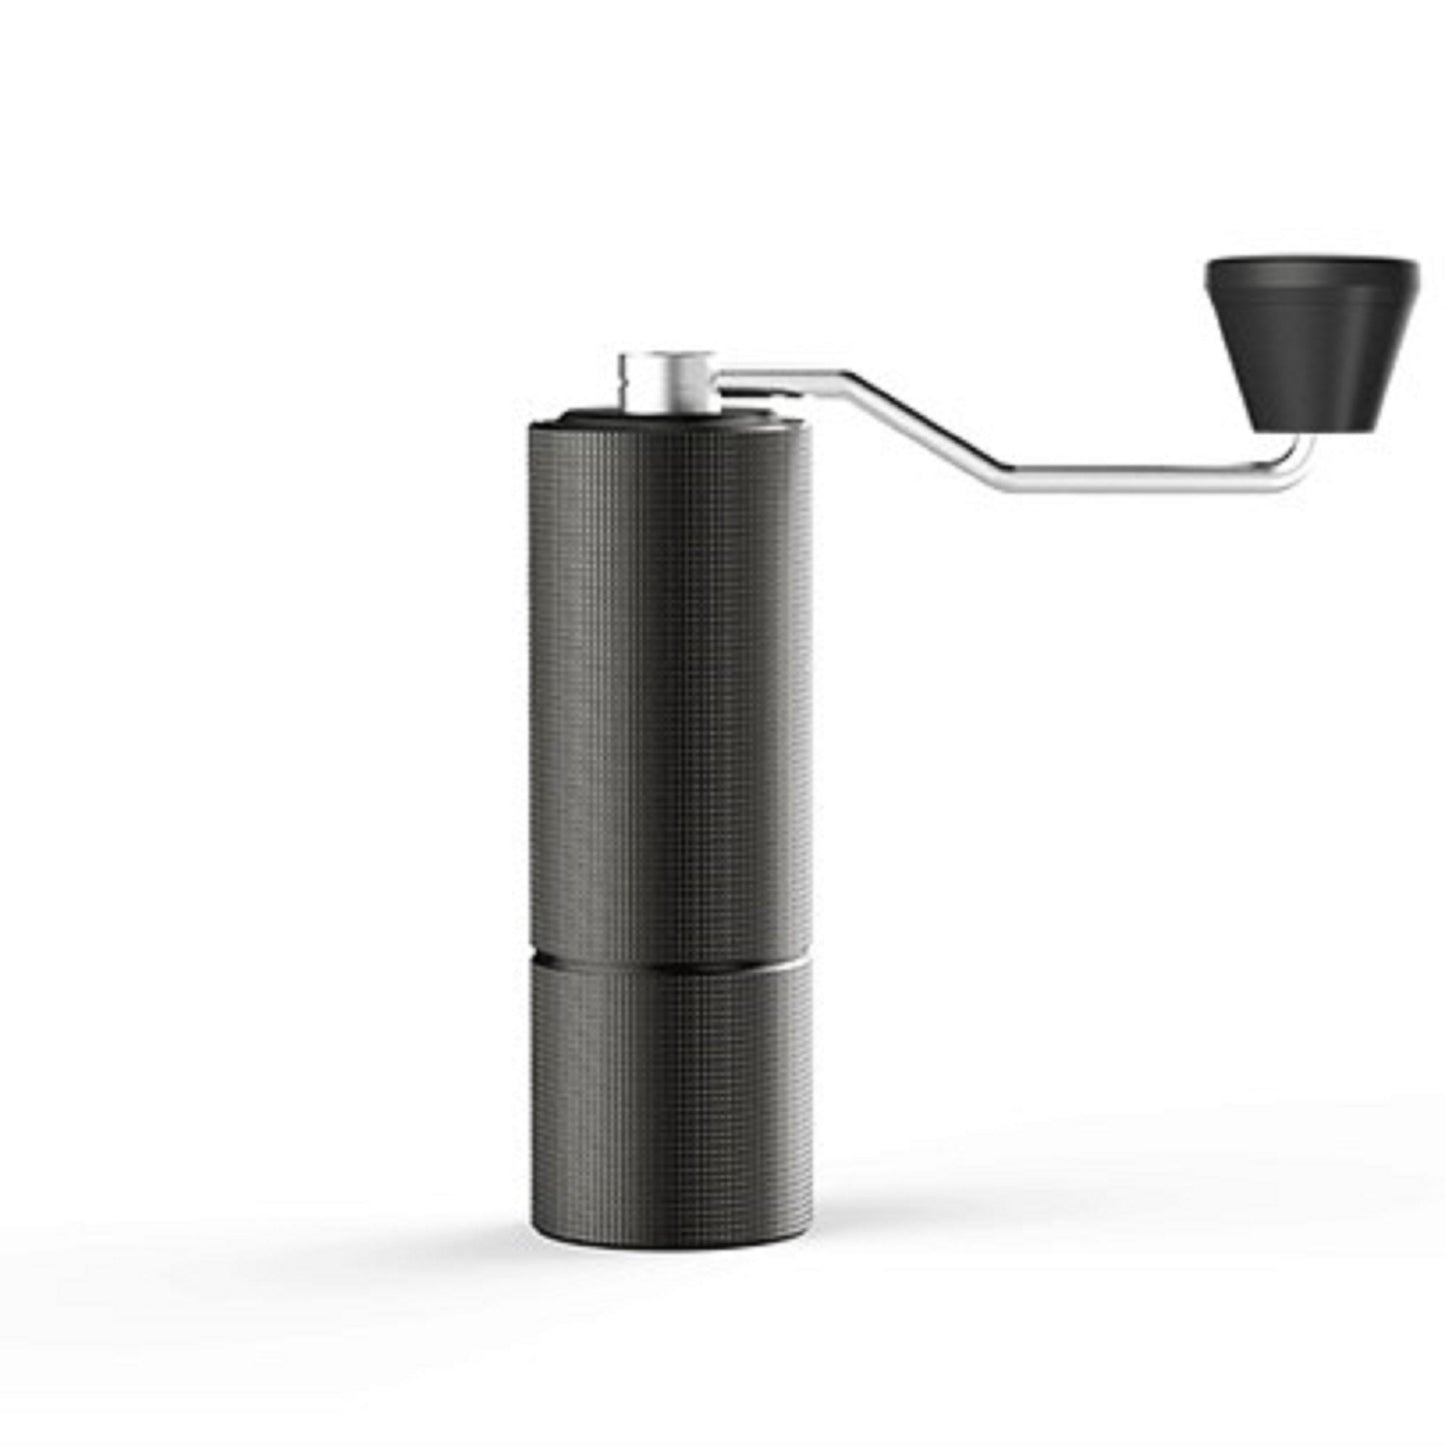 Load image into Gallery viewer, Timemore Chestnut C2 Manual Coffee Grinder - Velo Coffee Roasters
